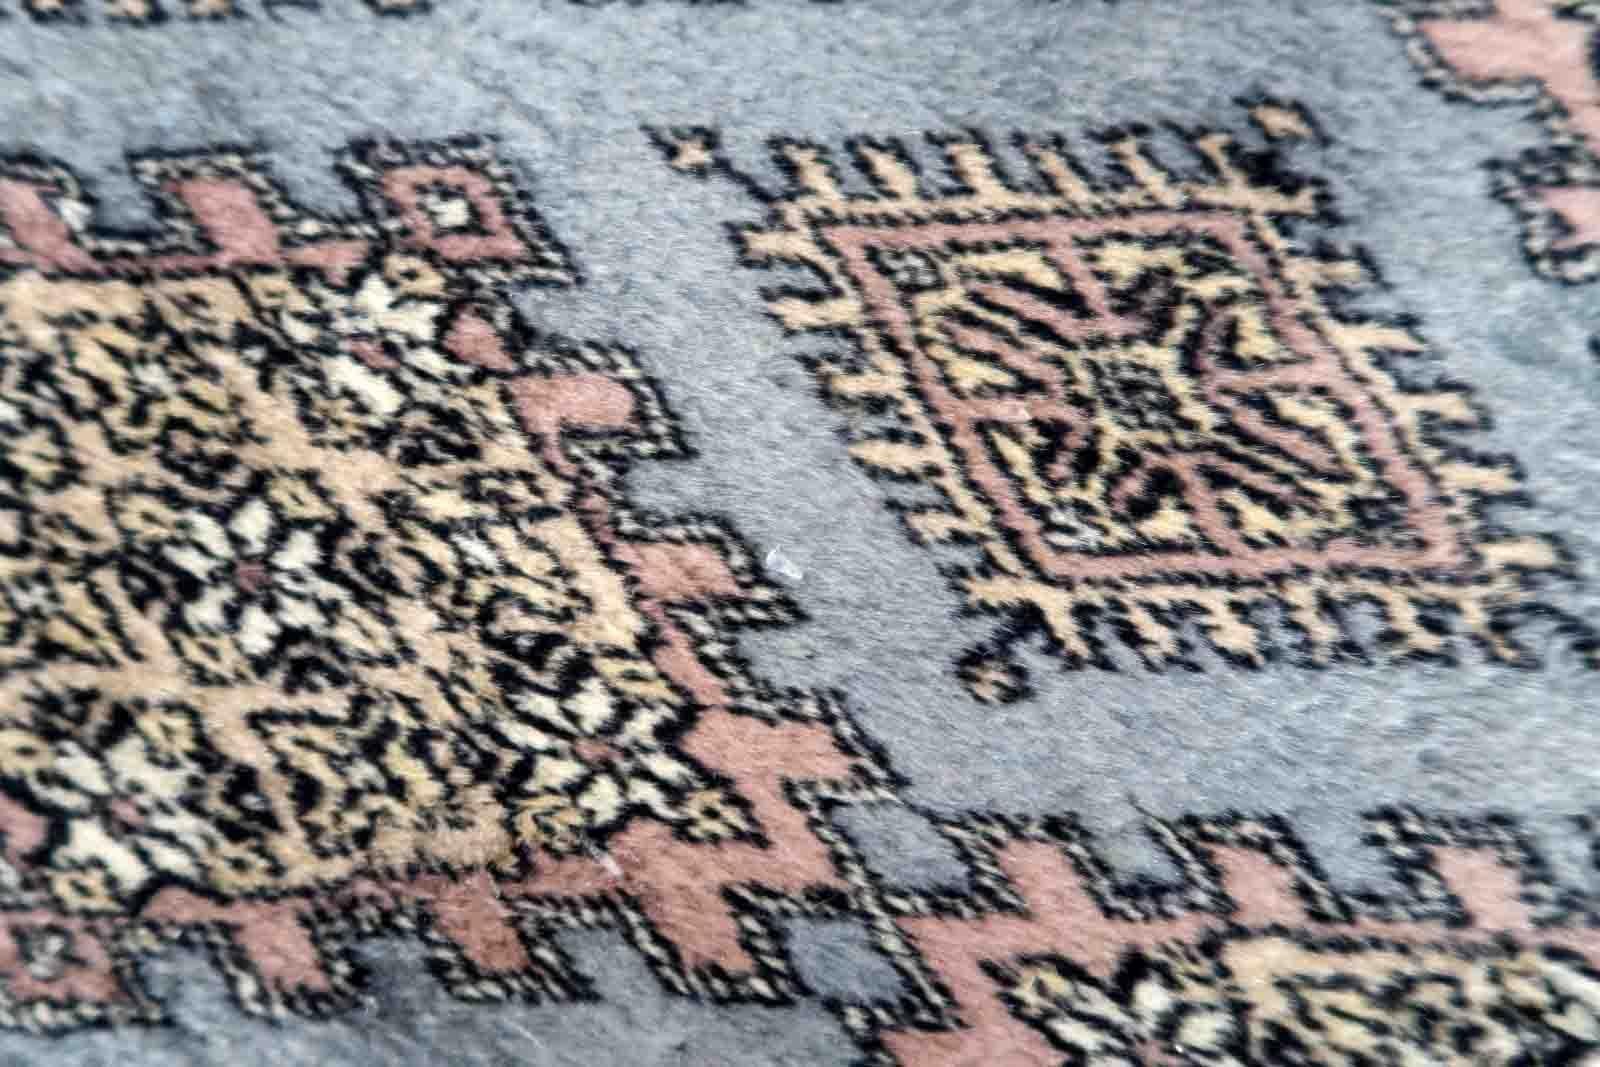 Handmade vintage Uzbek Bukhara runner in traditional design. The rug is from the end of 20th century made in wool.

-condition: original, one corner is damaged,

-circa: 1960s,

-size: 2.4' x 8' (75cm x 244cm),
?
-material: wool,

-country